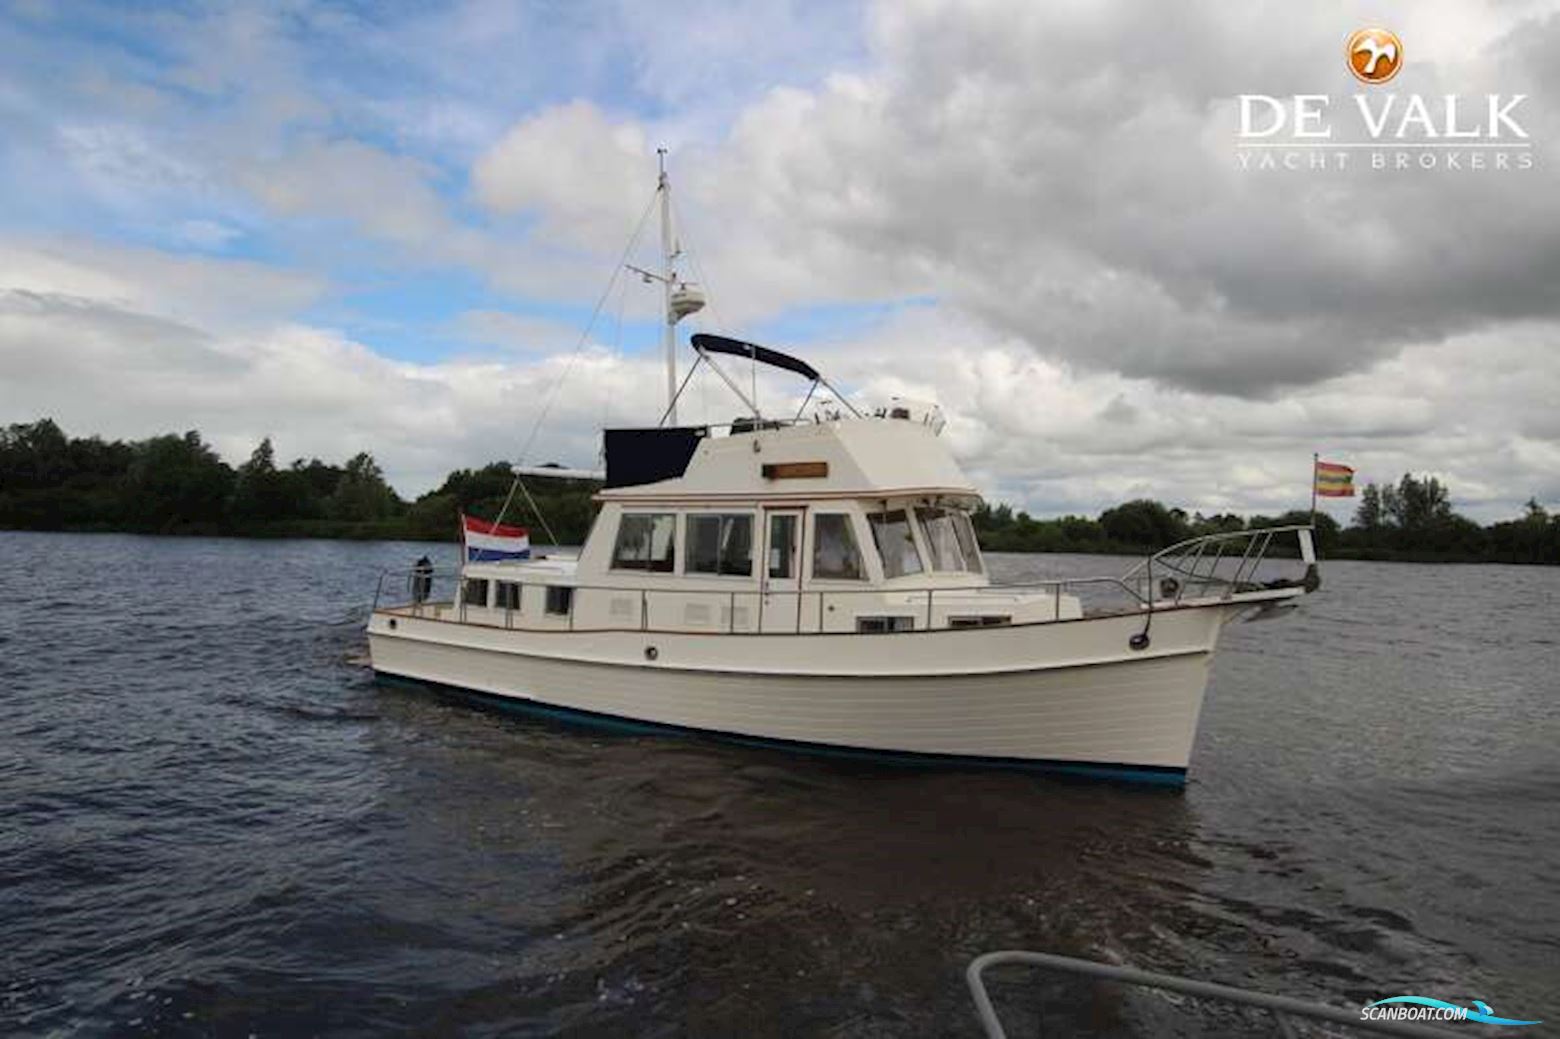 Grand Banks 36 Classic Motor boat 1992, with Ford Lehman engine, The Netherlands